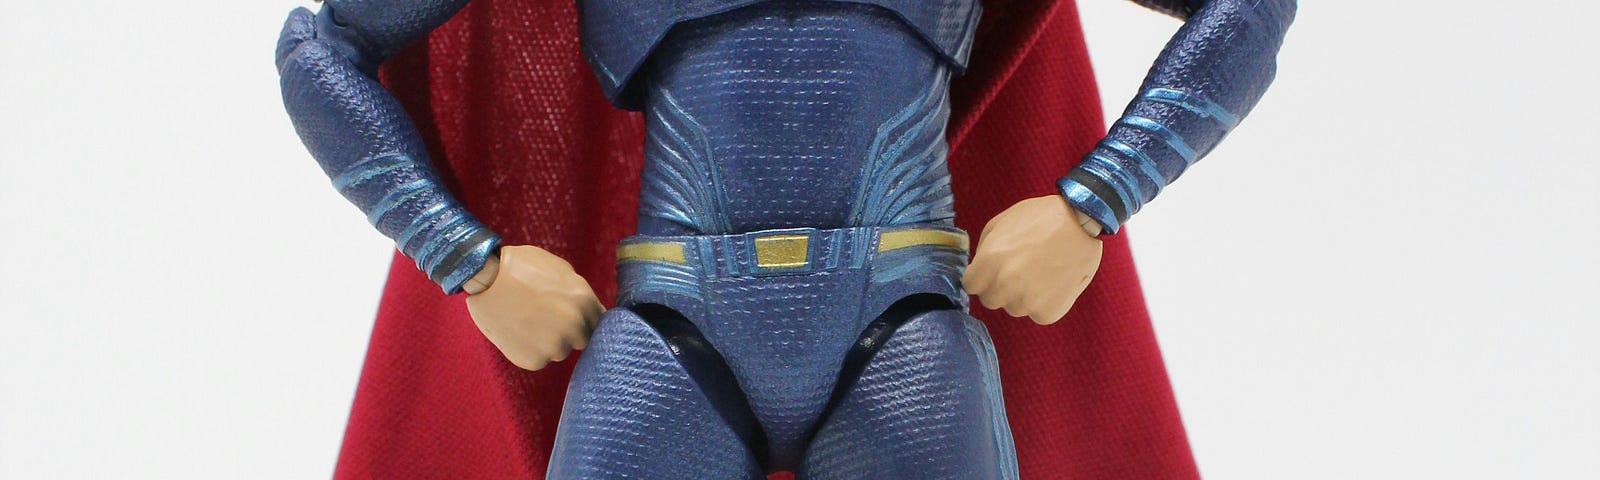 Toy figure of superman in blue suit and a red cape and red boots with an S on his chest.